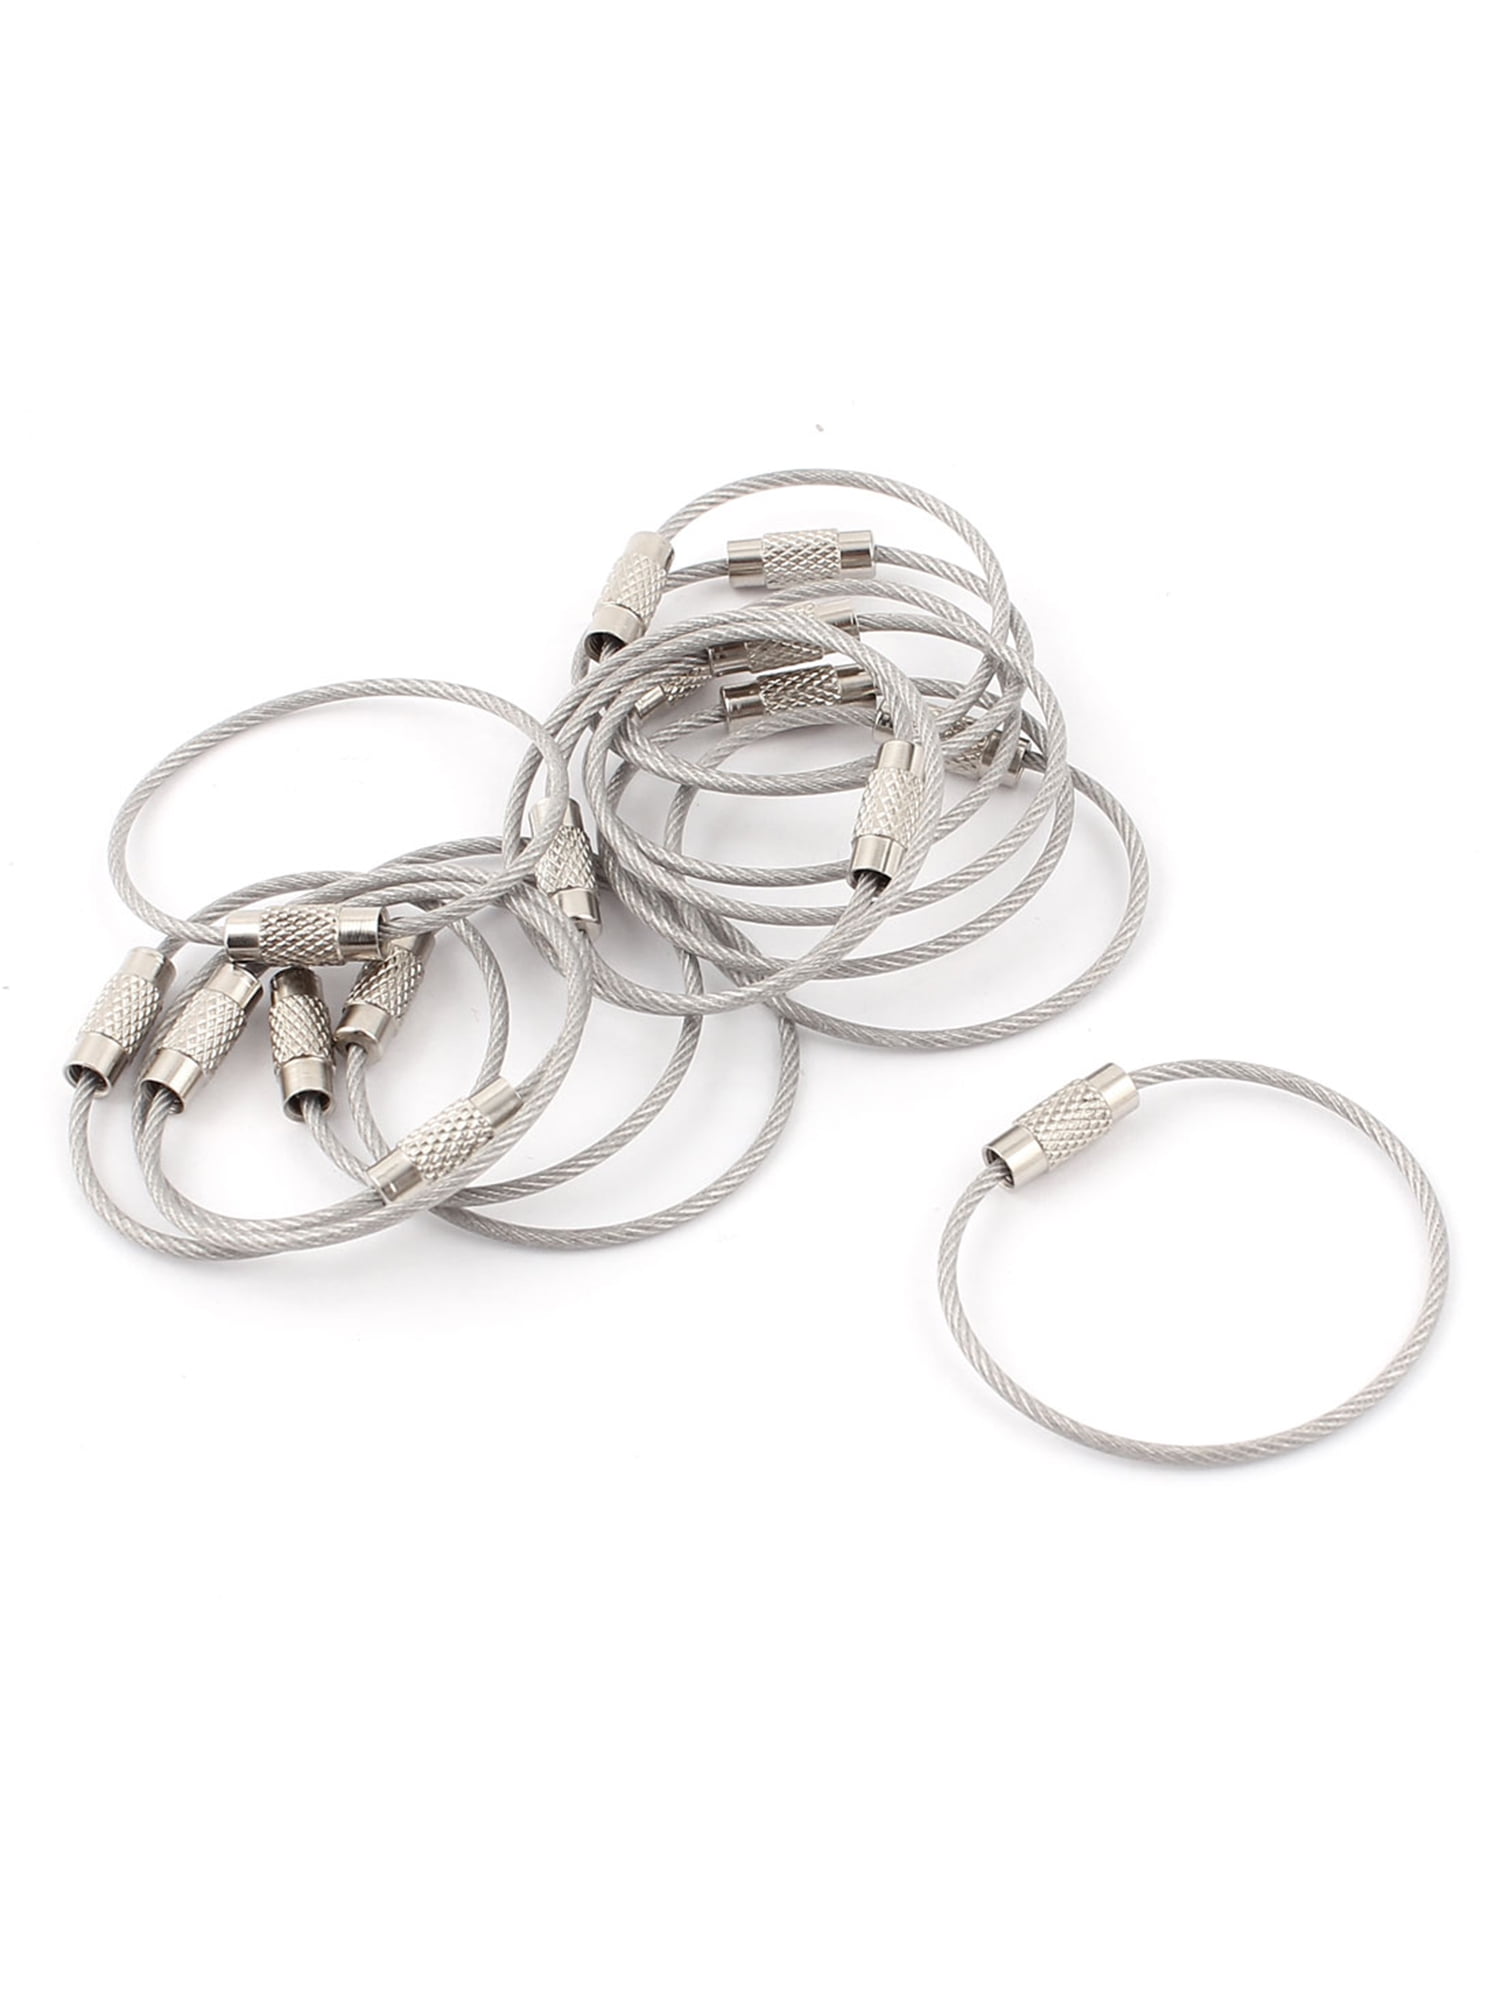 Pack of 20-6.3 inch Keyrings and ID Tag Keepers Keychain Wisdompro 20 Pack of 6.3 Inches Stainless Steel Wire Ring 2mm Cable Loop Rings for Hanging Luggage Tag